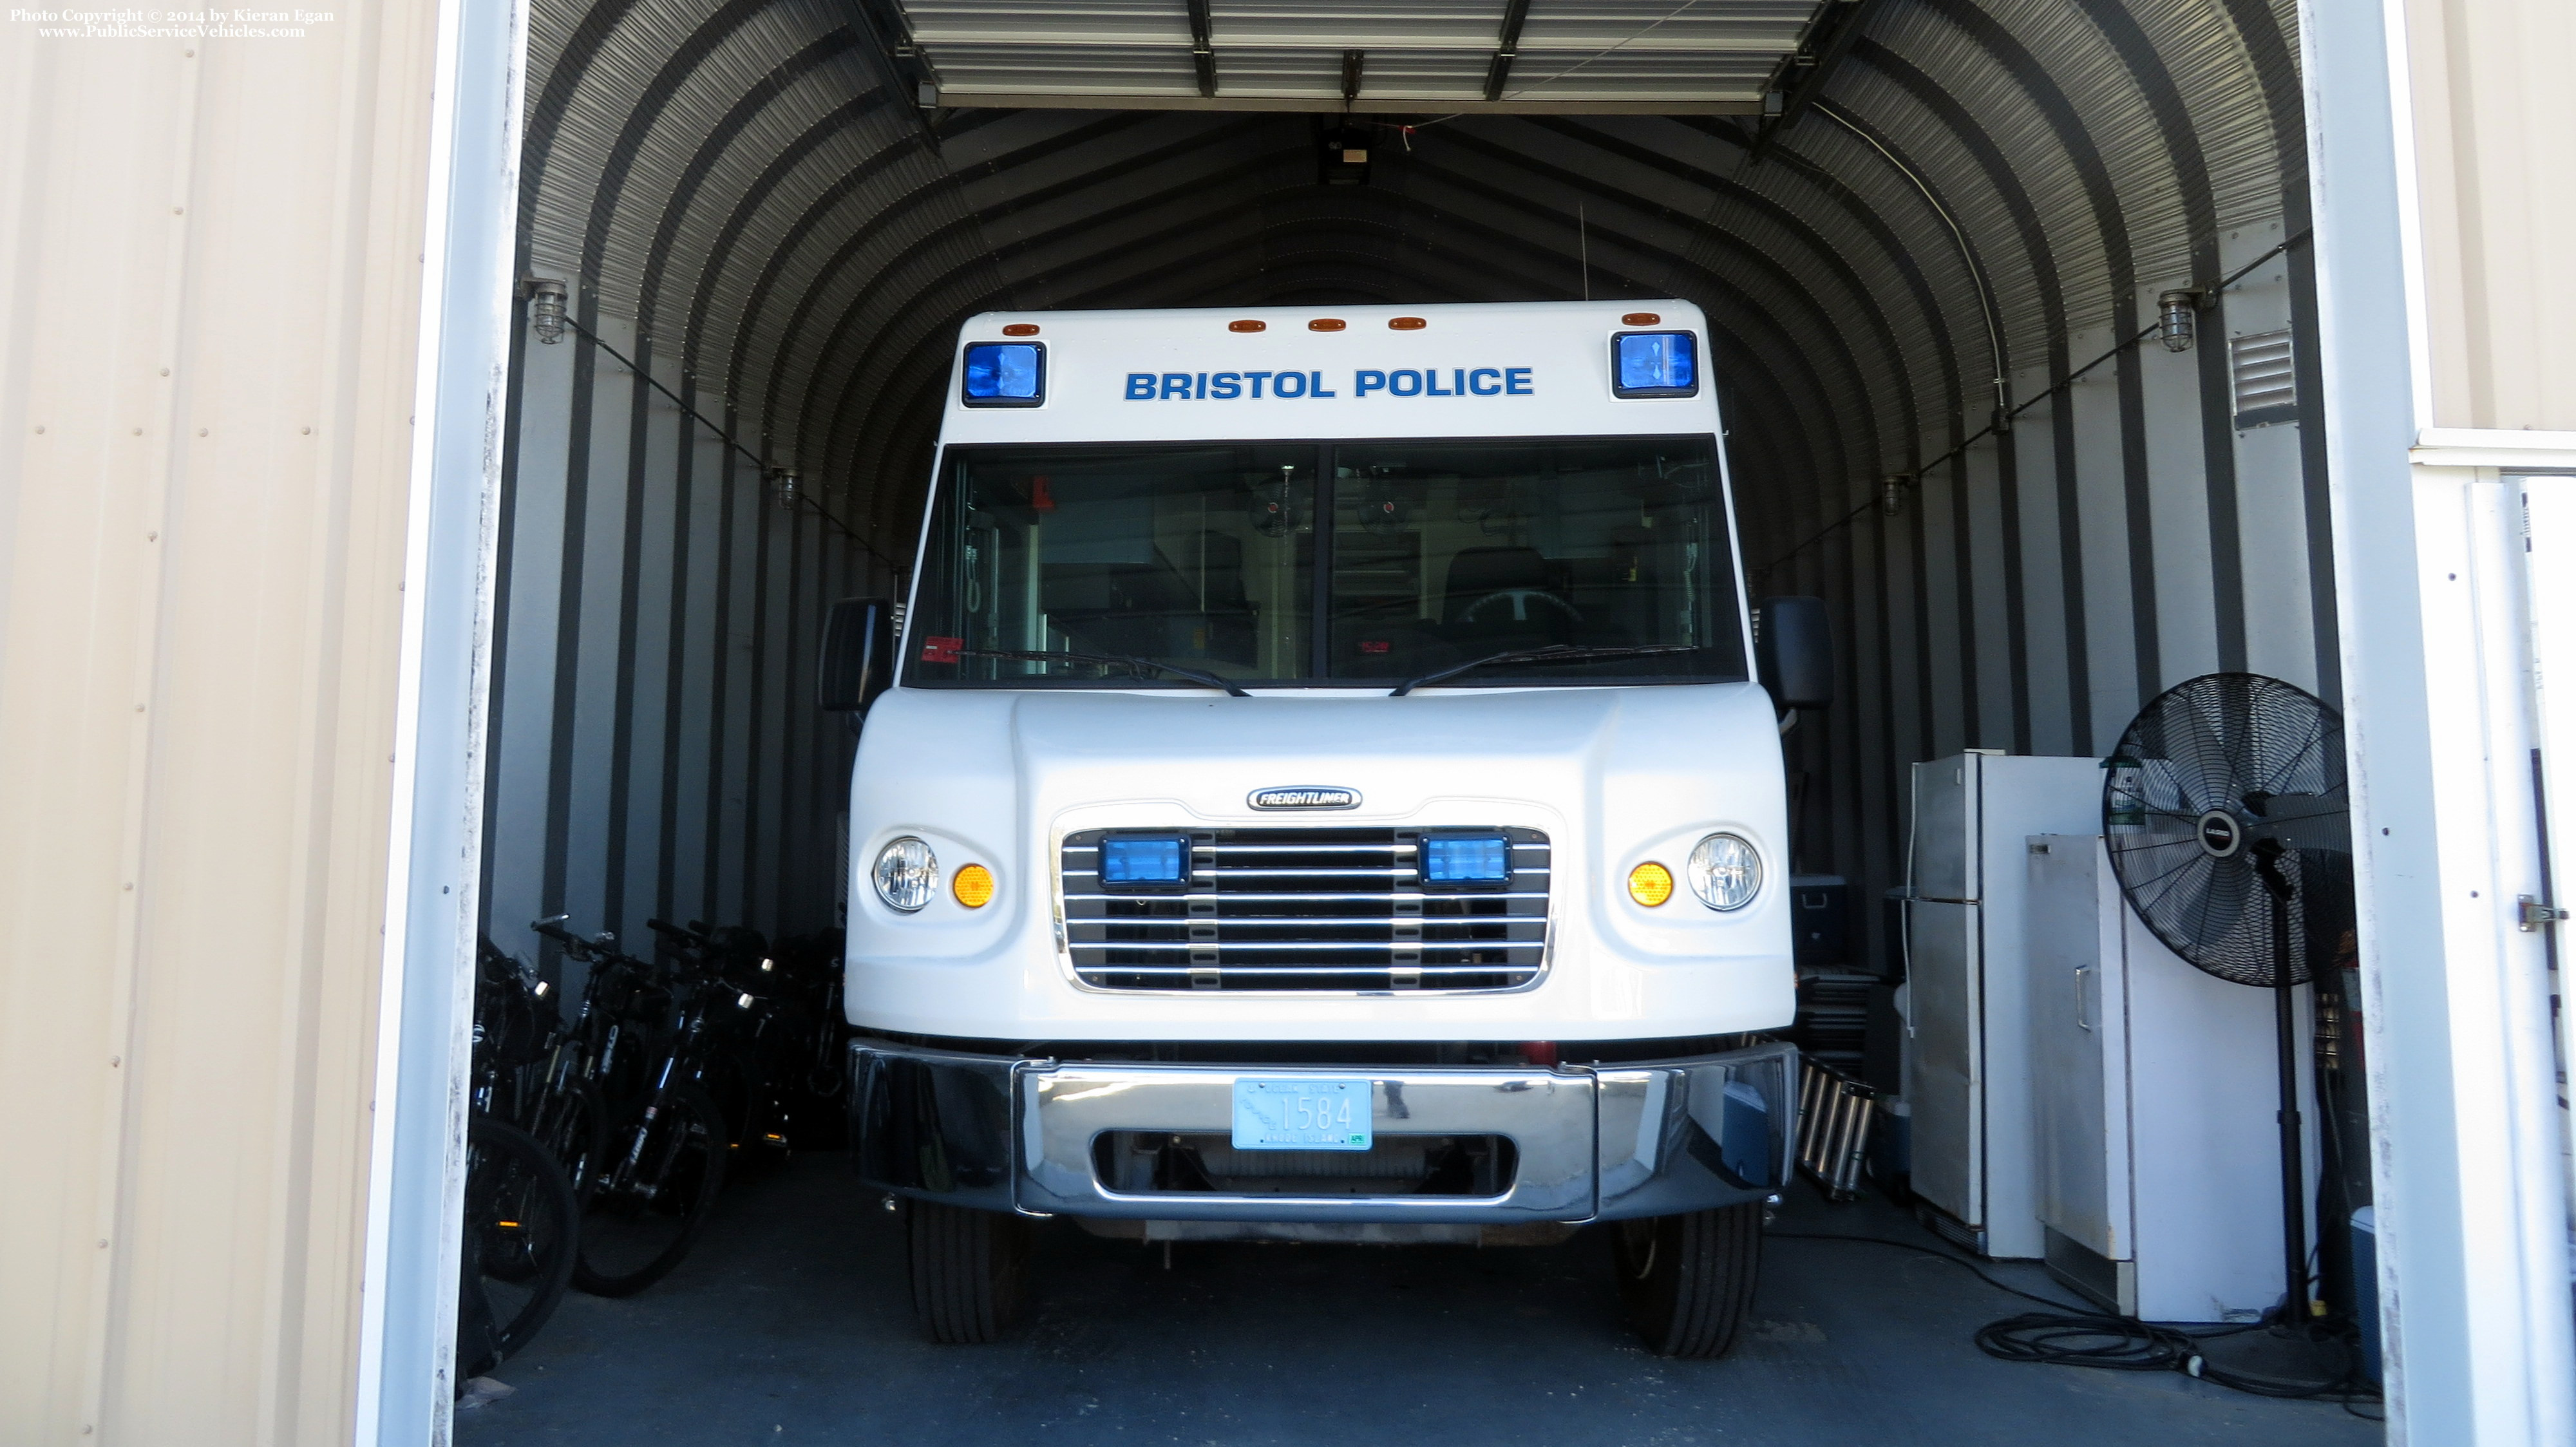 A photo  of Bristol Police
            Mobile Command Center 1584, a 2008 Freightliner             taken by Kieran Egan